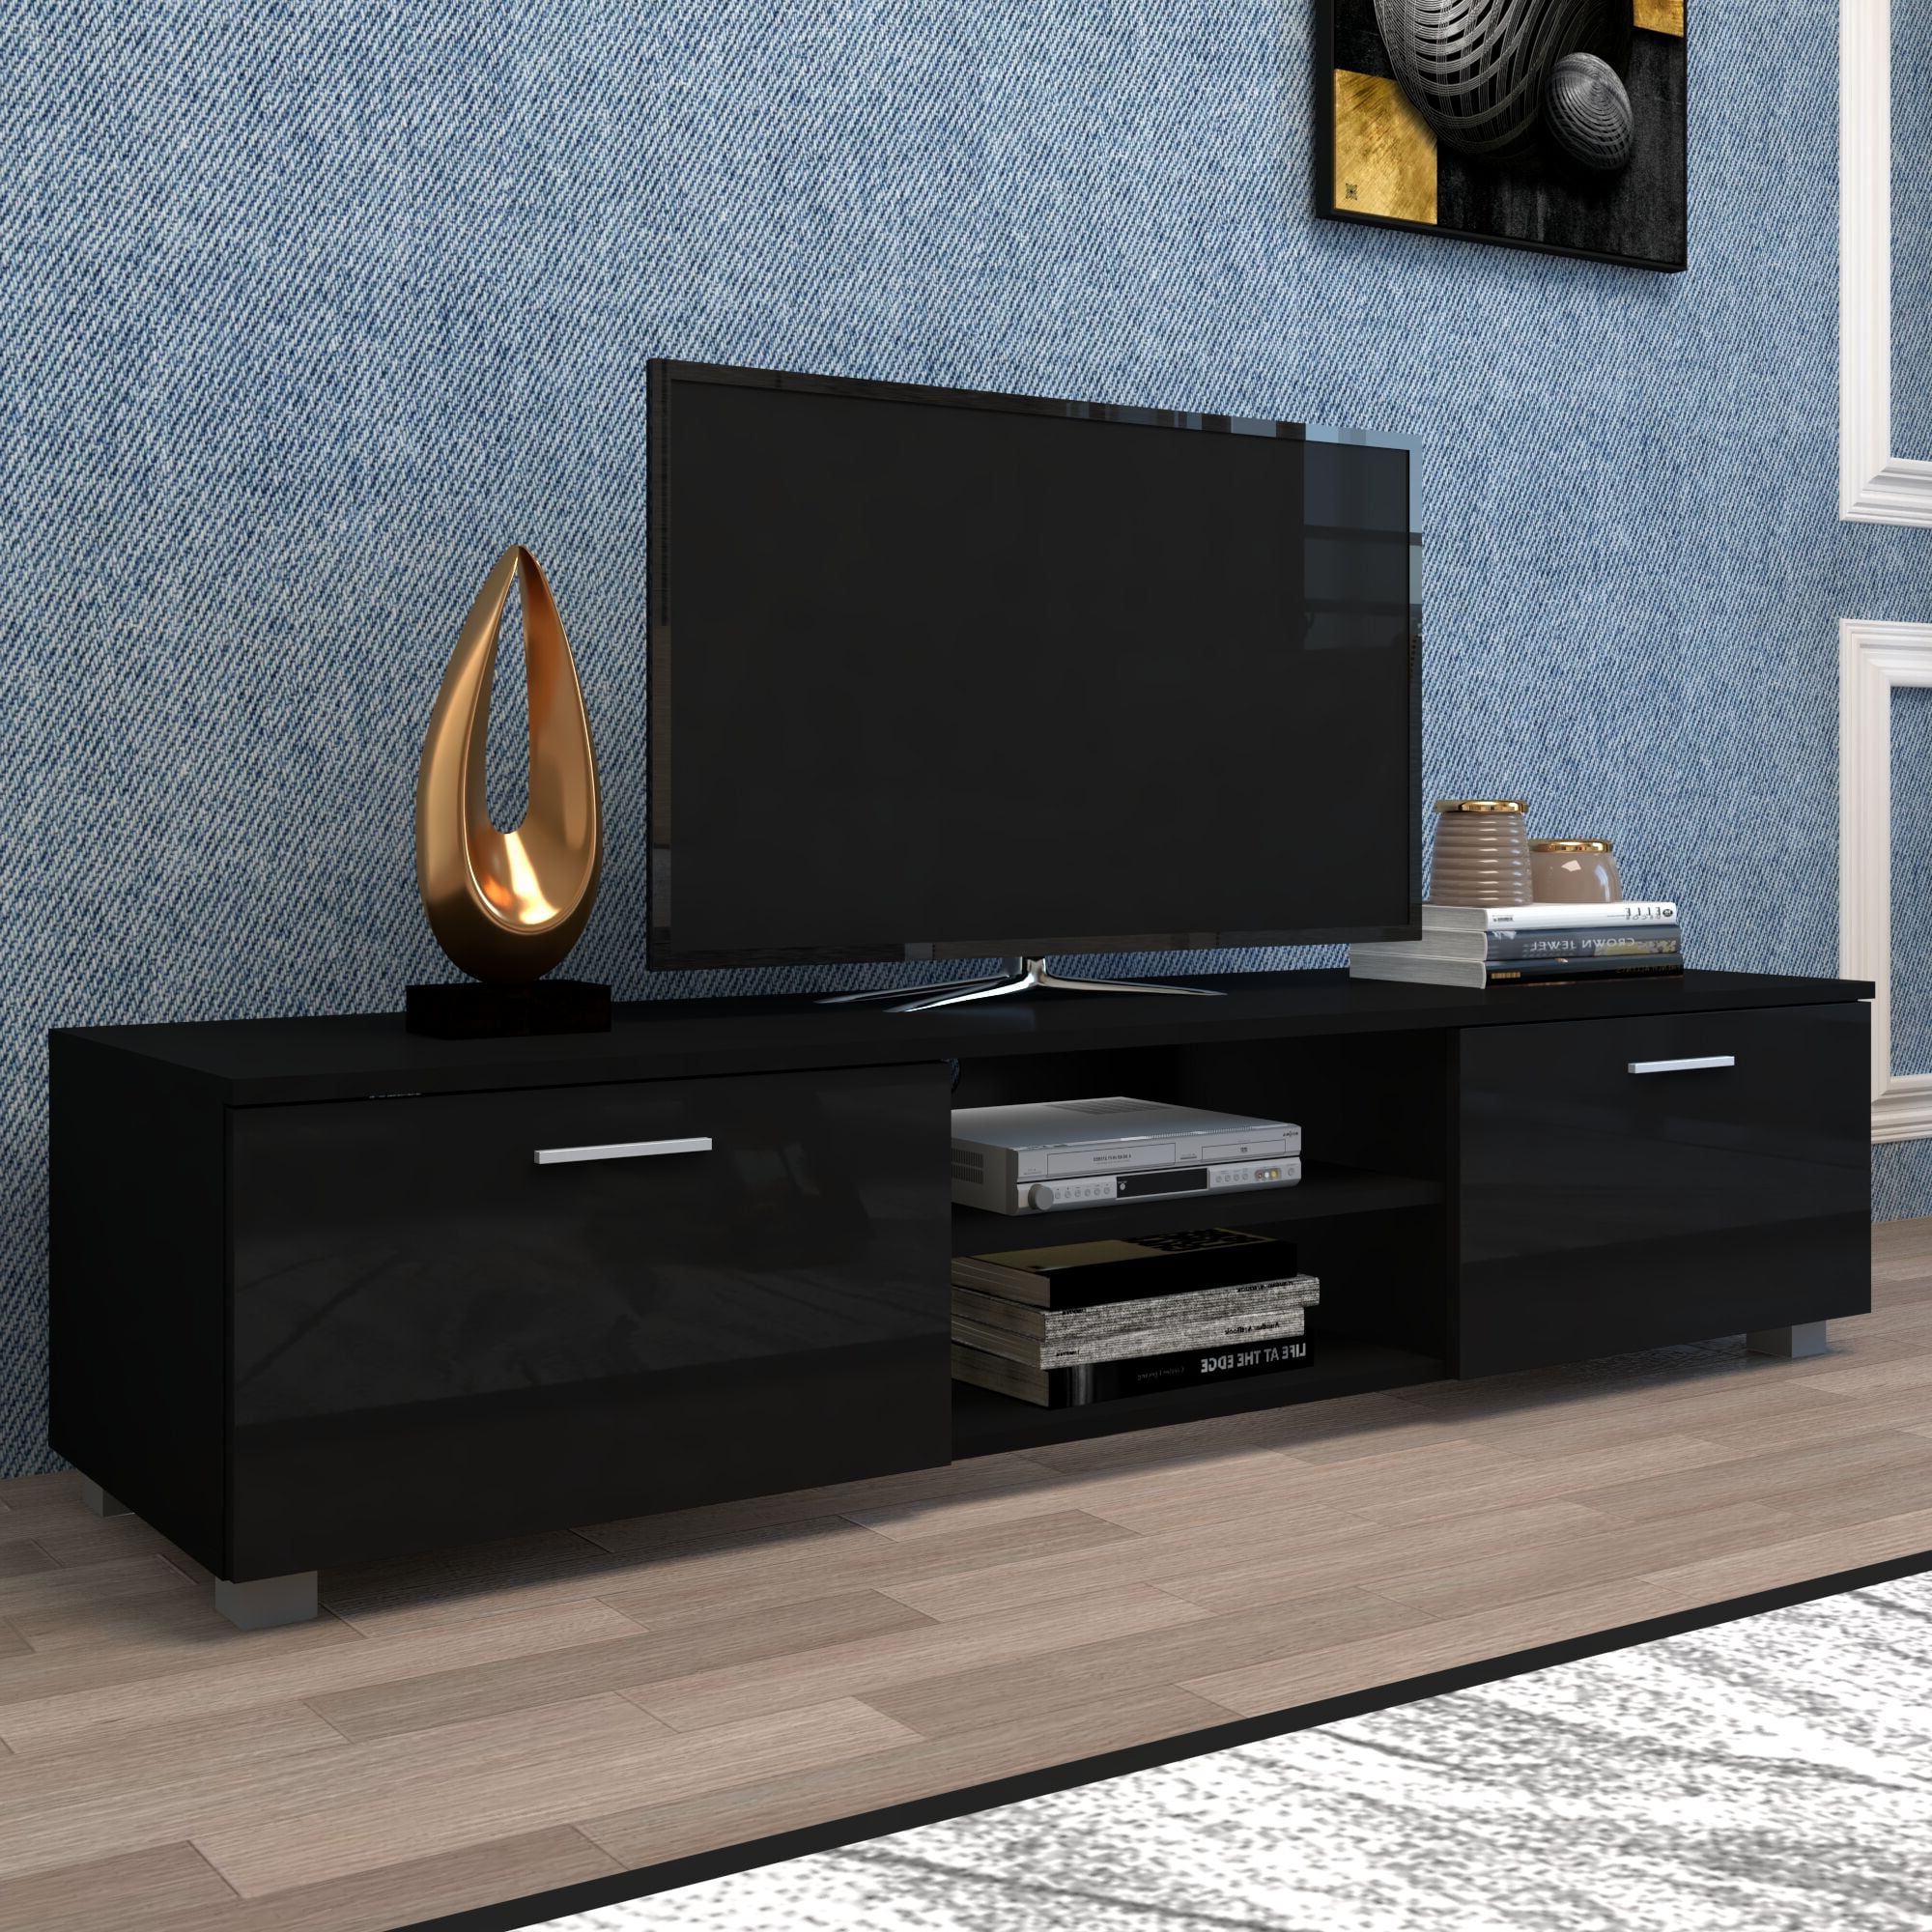 Modern Stands With Shelves Within Widely Used Black Modern Tv Stand For 70 Inch Tv Stands, Media Console (View 9 of 15)